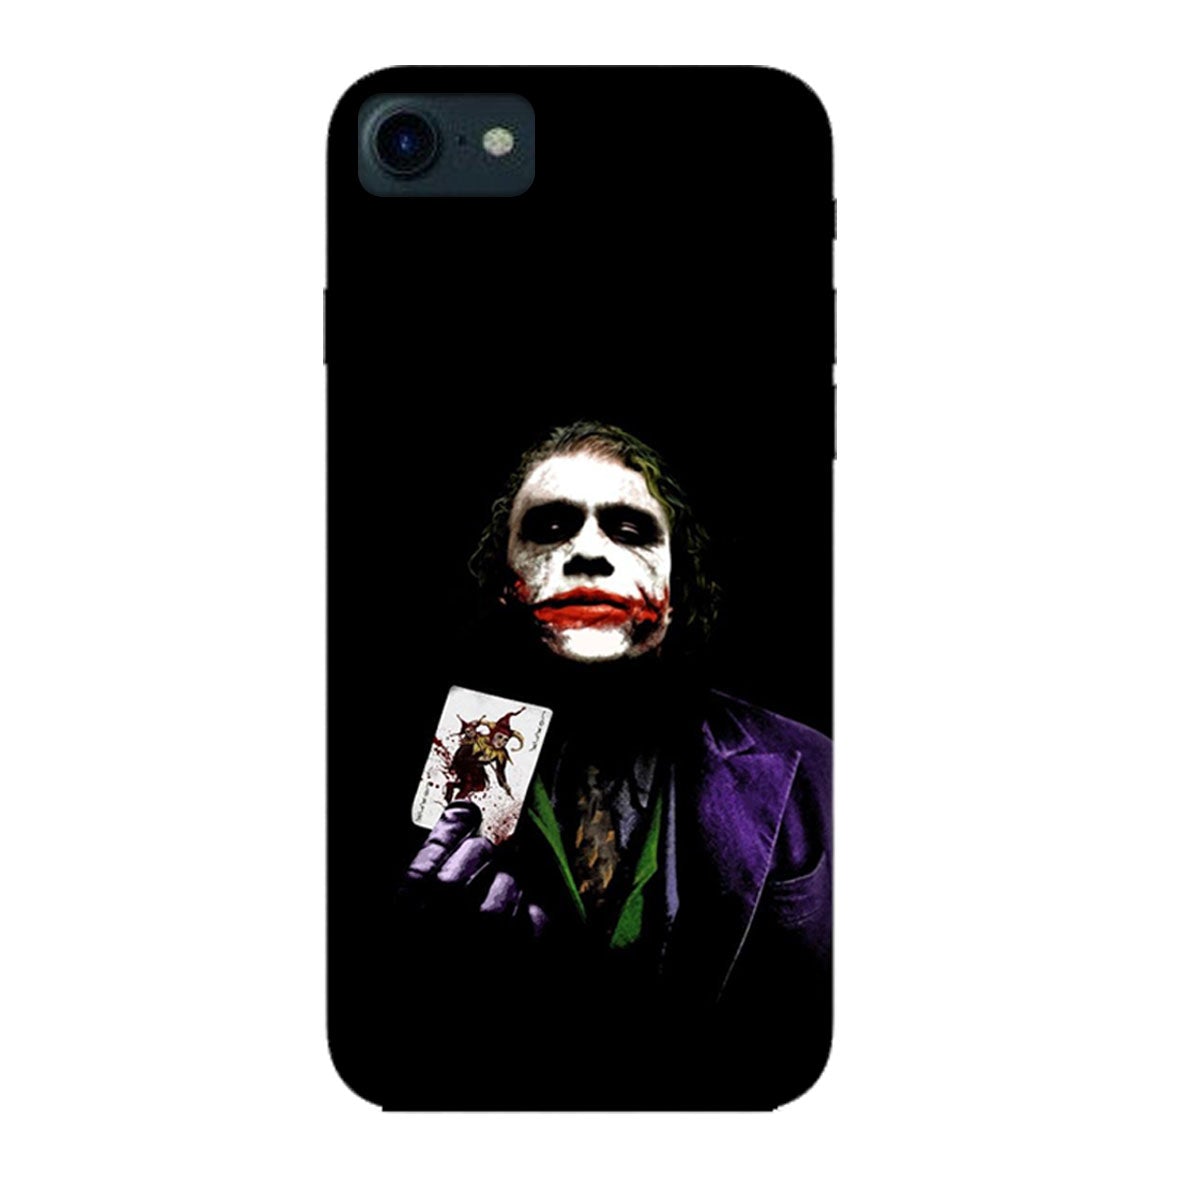 The Joker with Card - Mobile Phone Cover - Hard Case